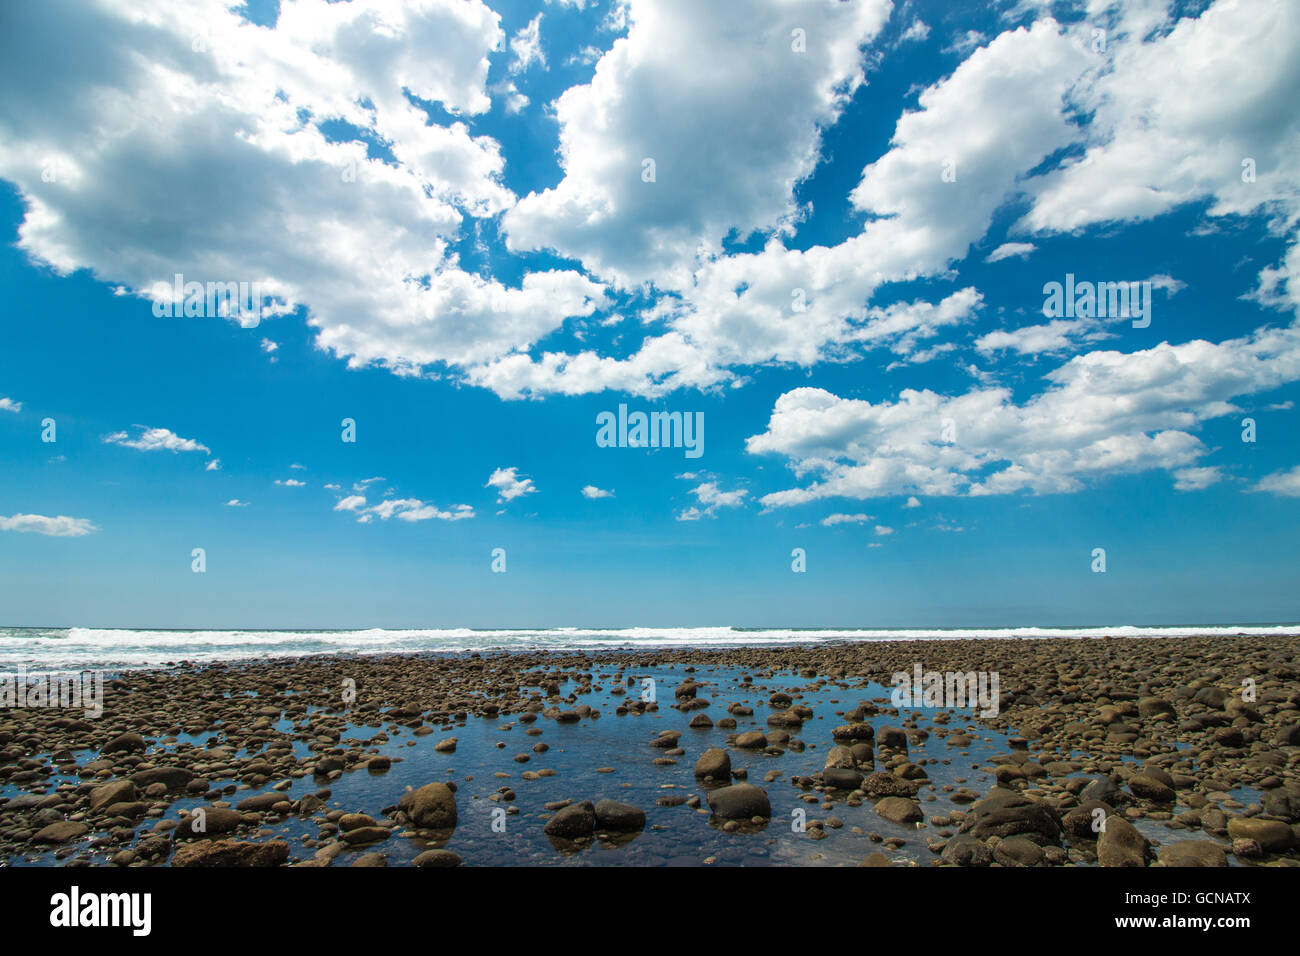 Wide angle view of the volcanic beach at Playa El Tunco at El Salvador Stock Photo